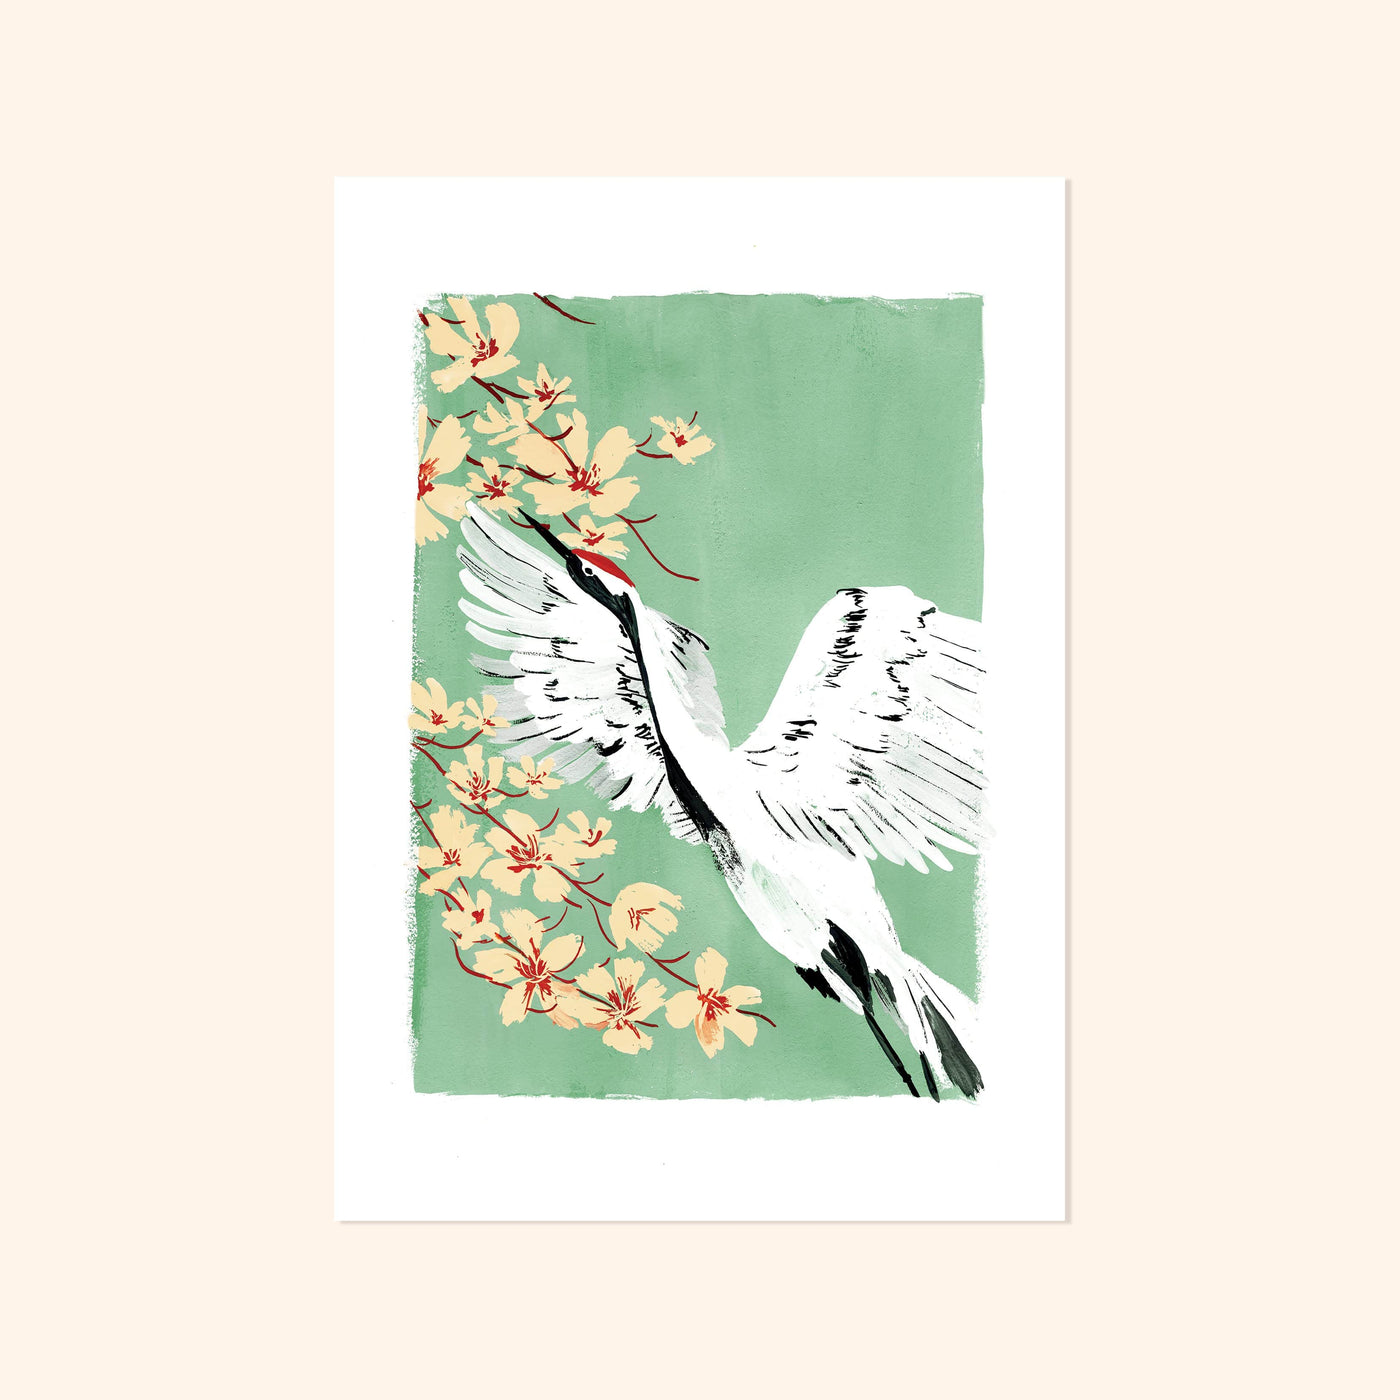 A Full Colour Giclee Print Featuring a Crane And Cherry Blossom On A Teal Background - Annie Dornan Smith